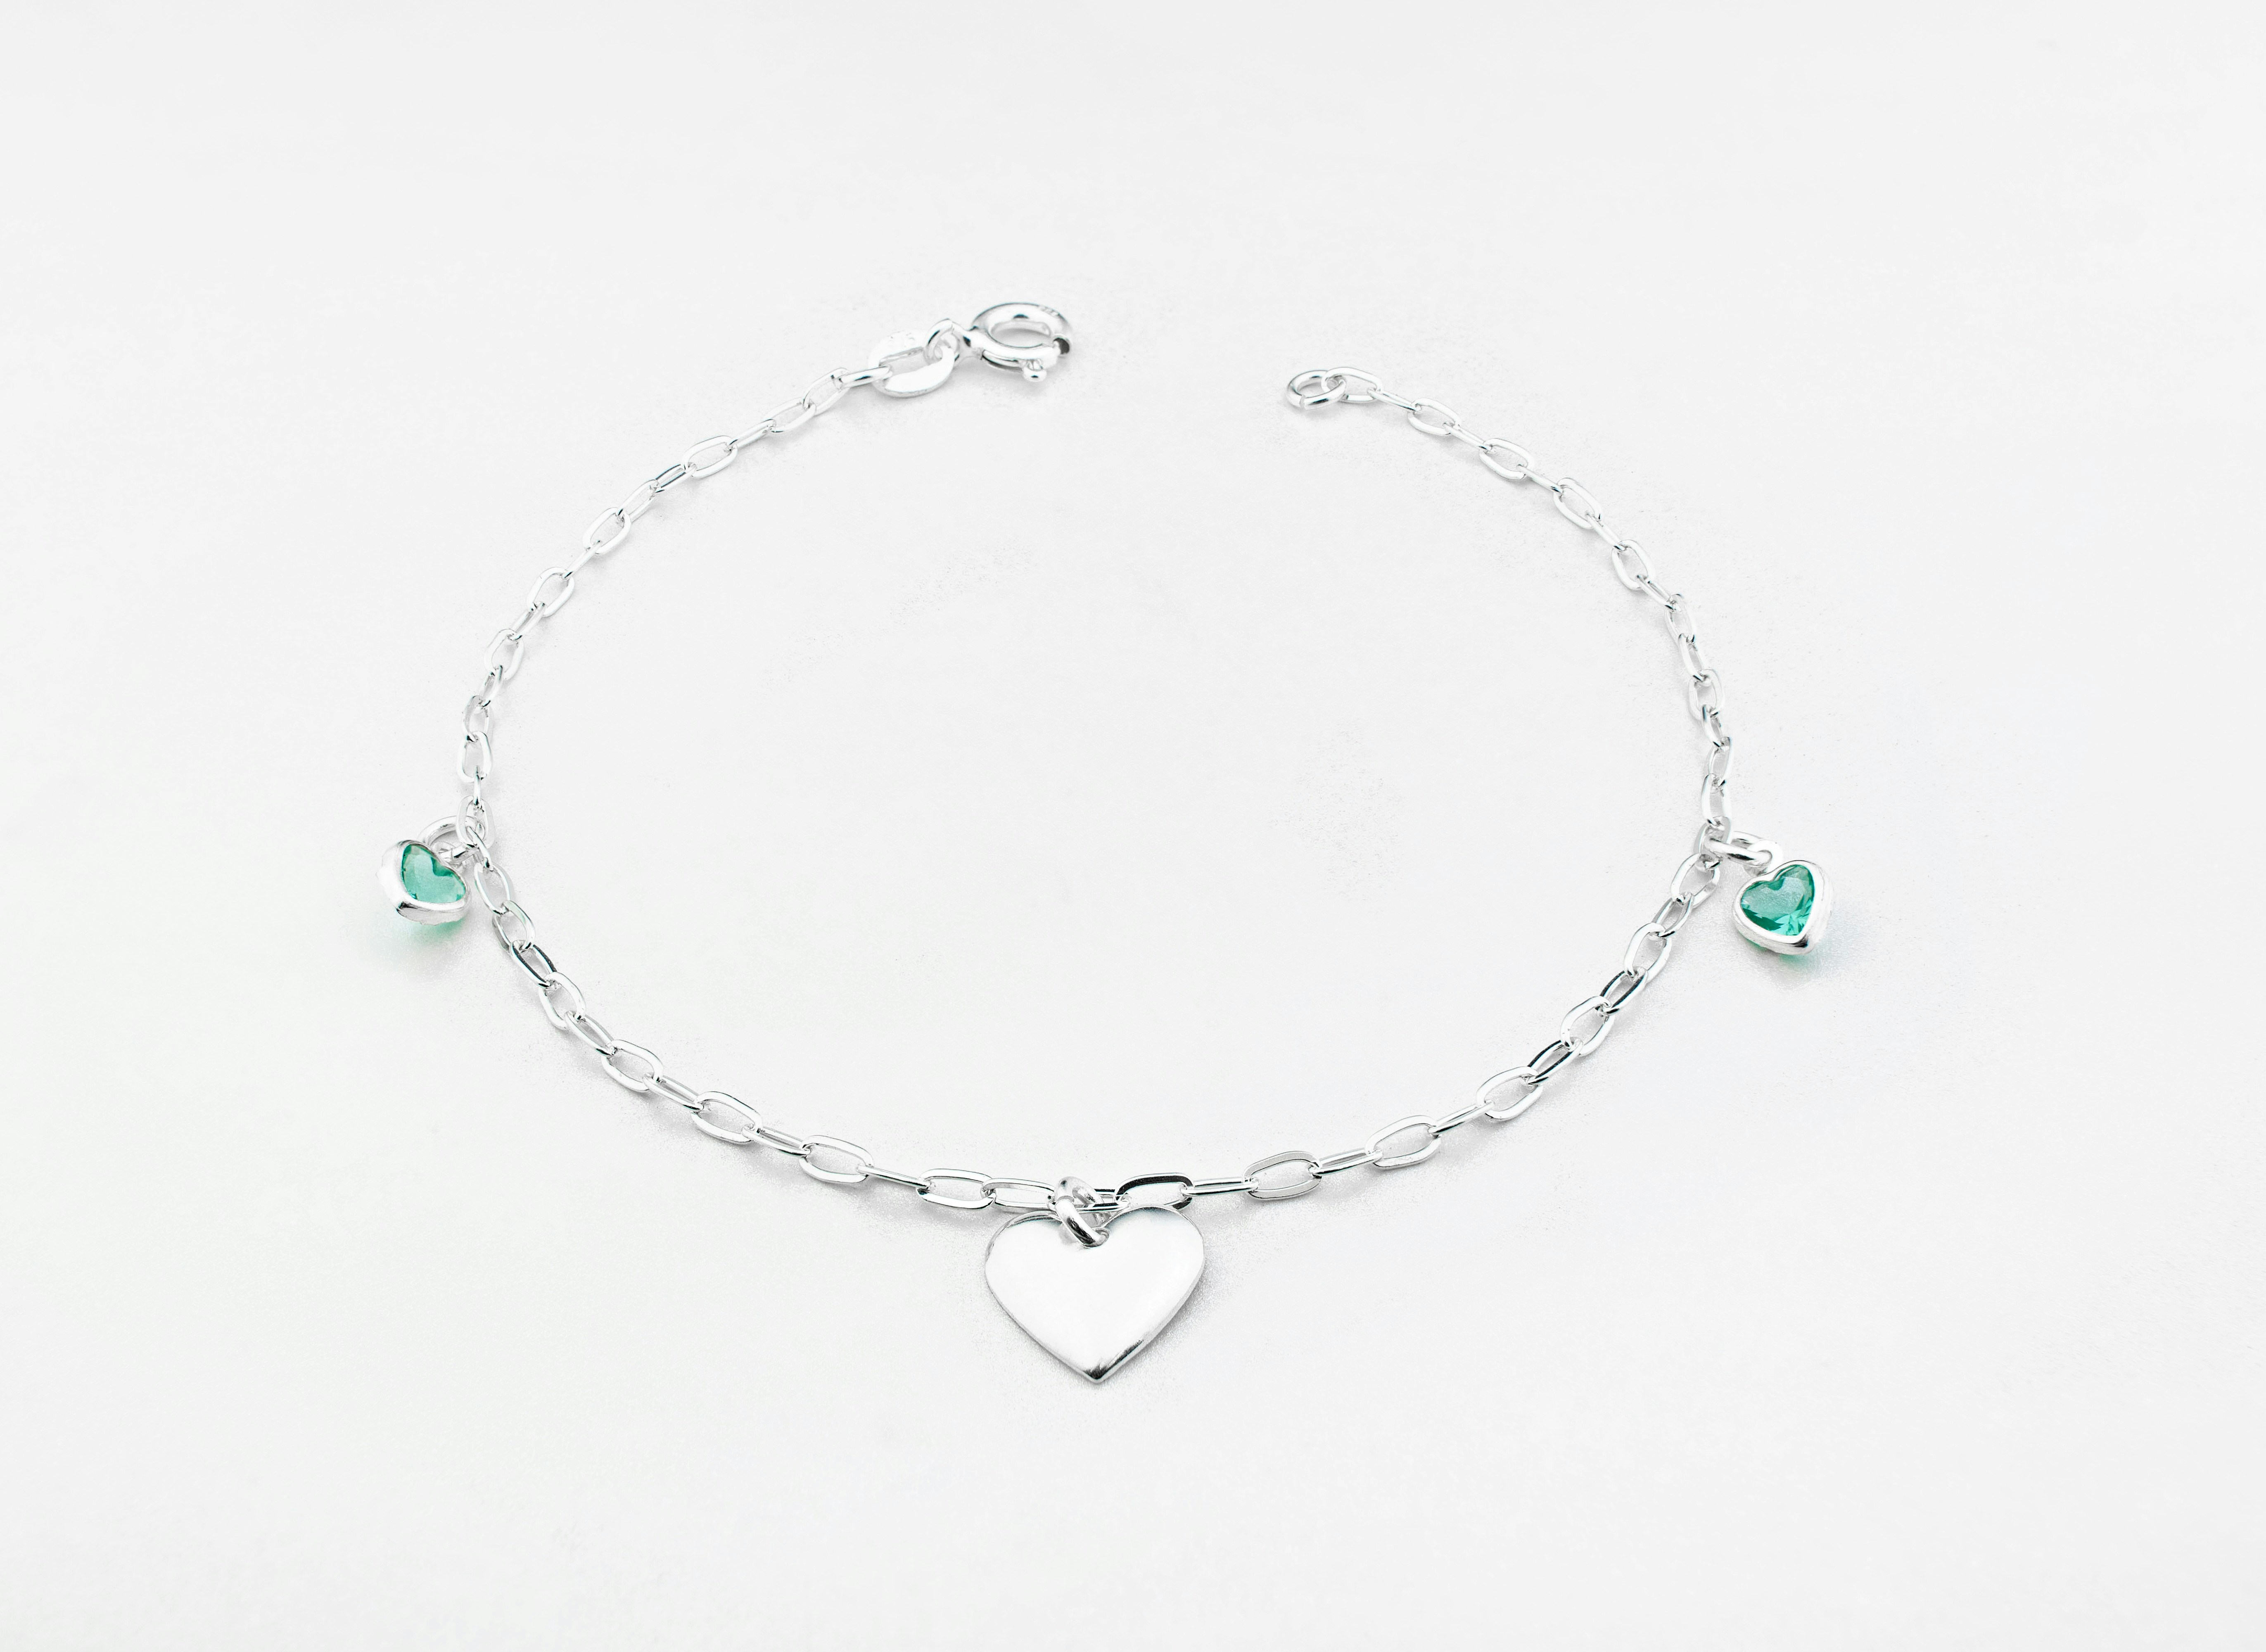 Silver bracelet on plain bright background with tiny green heart-shaped gems